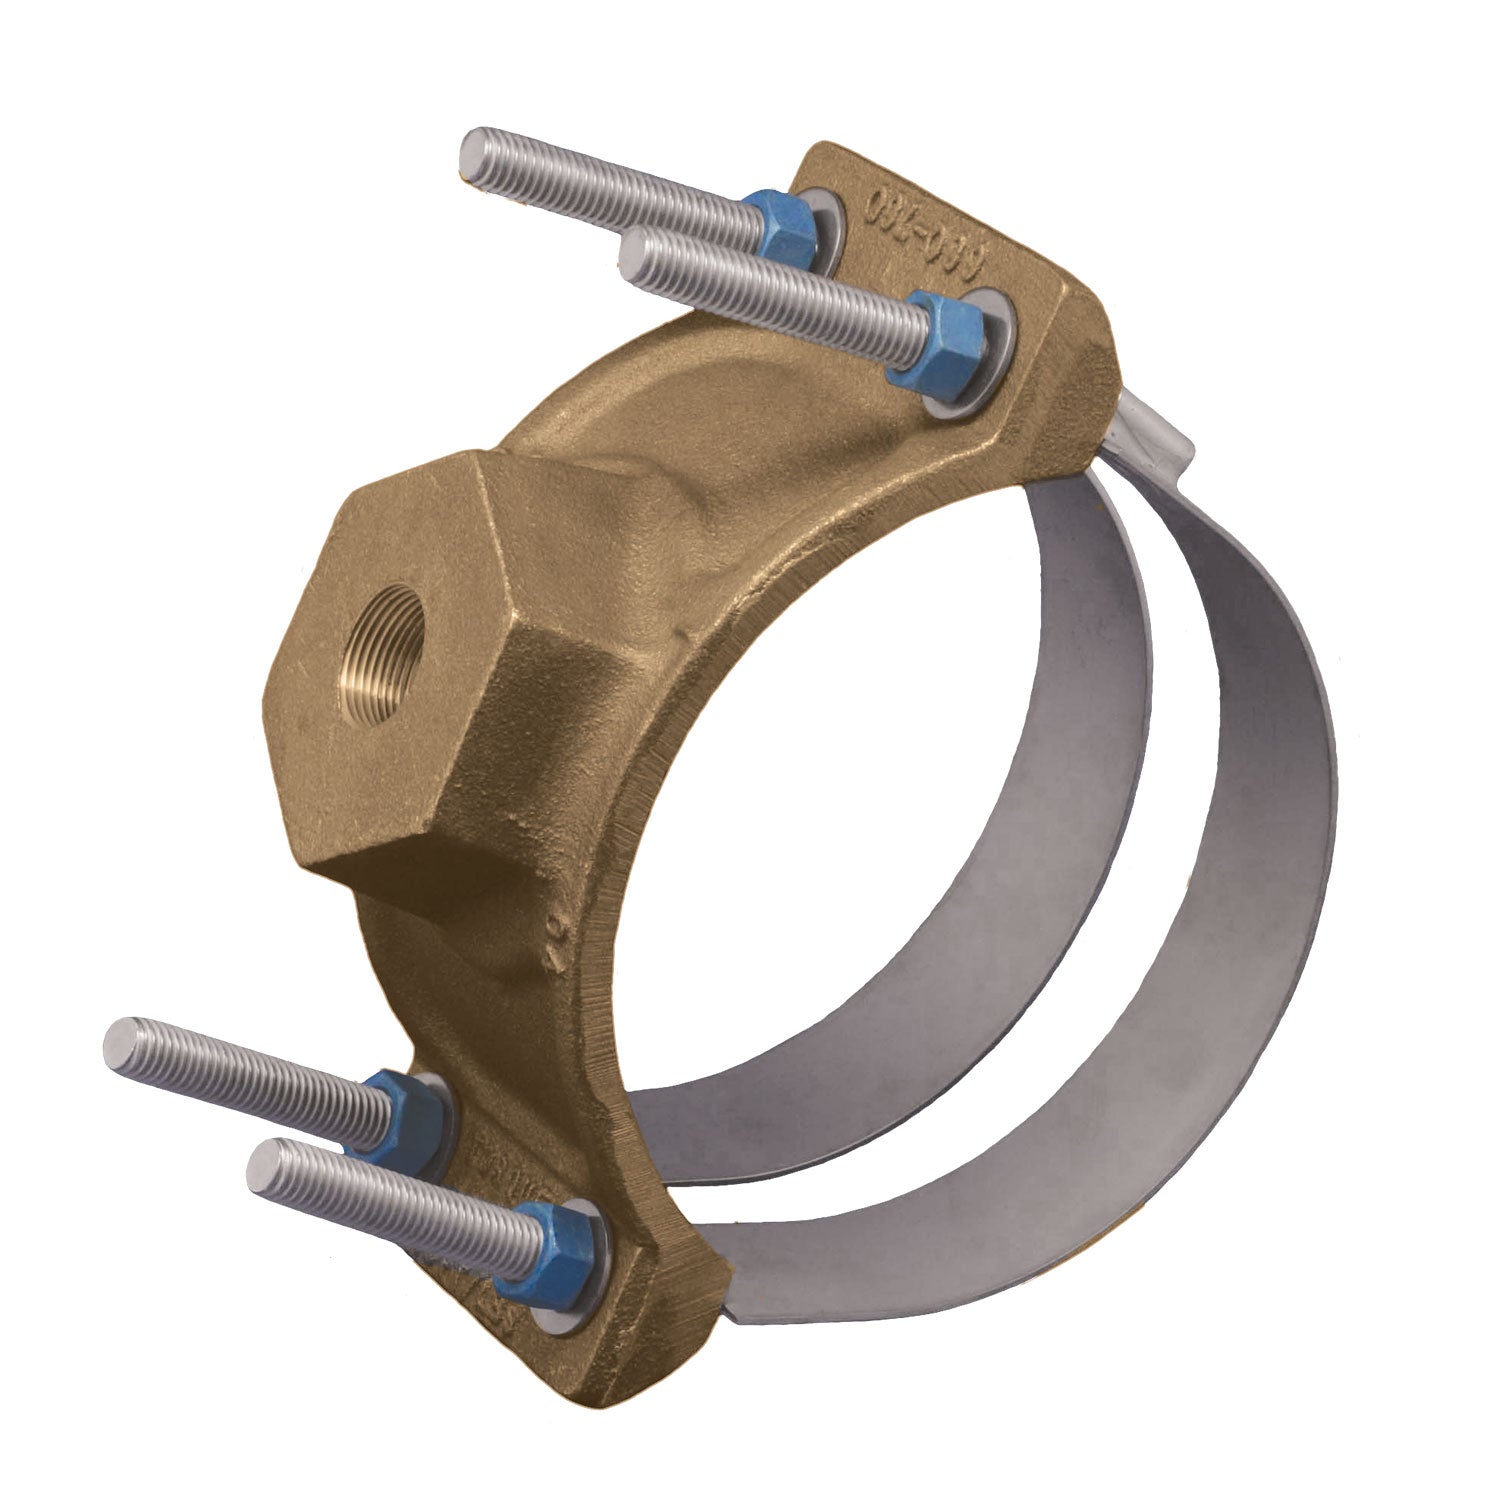 Robar 2706 Series Cast Bronze Service Saddles w/ Double Stainless Straps - IP Thread Waterworks Products - Cleanflow